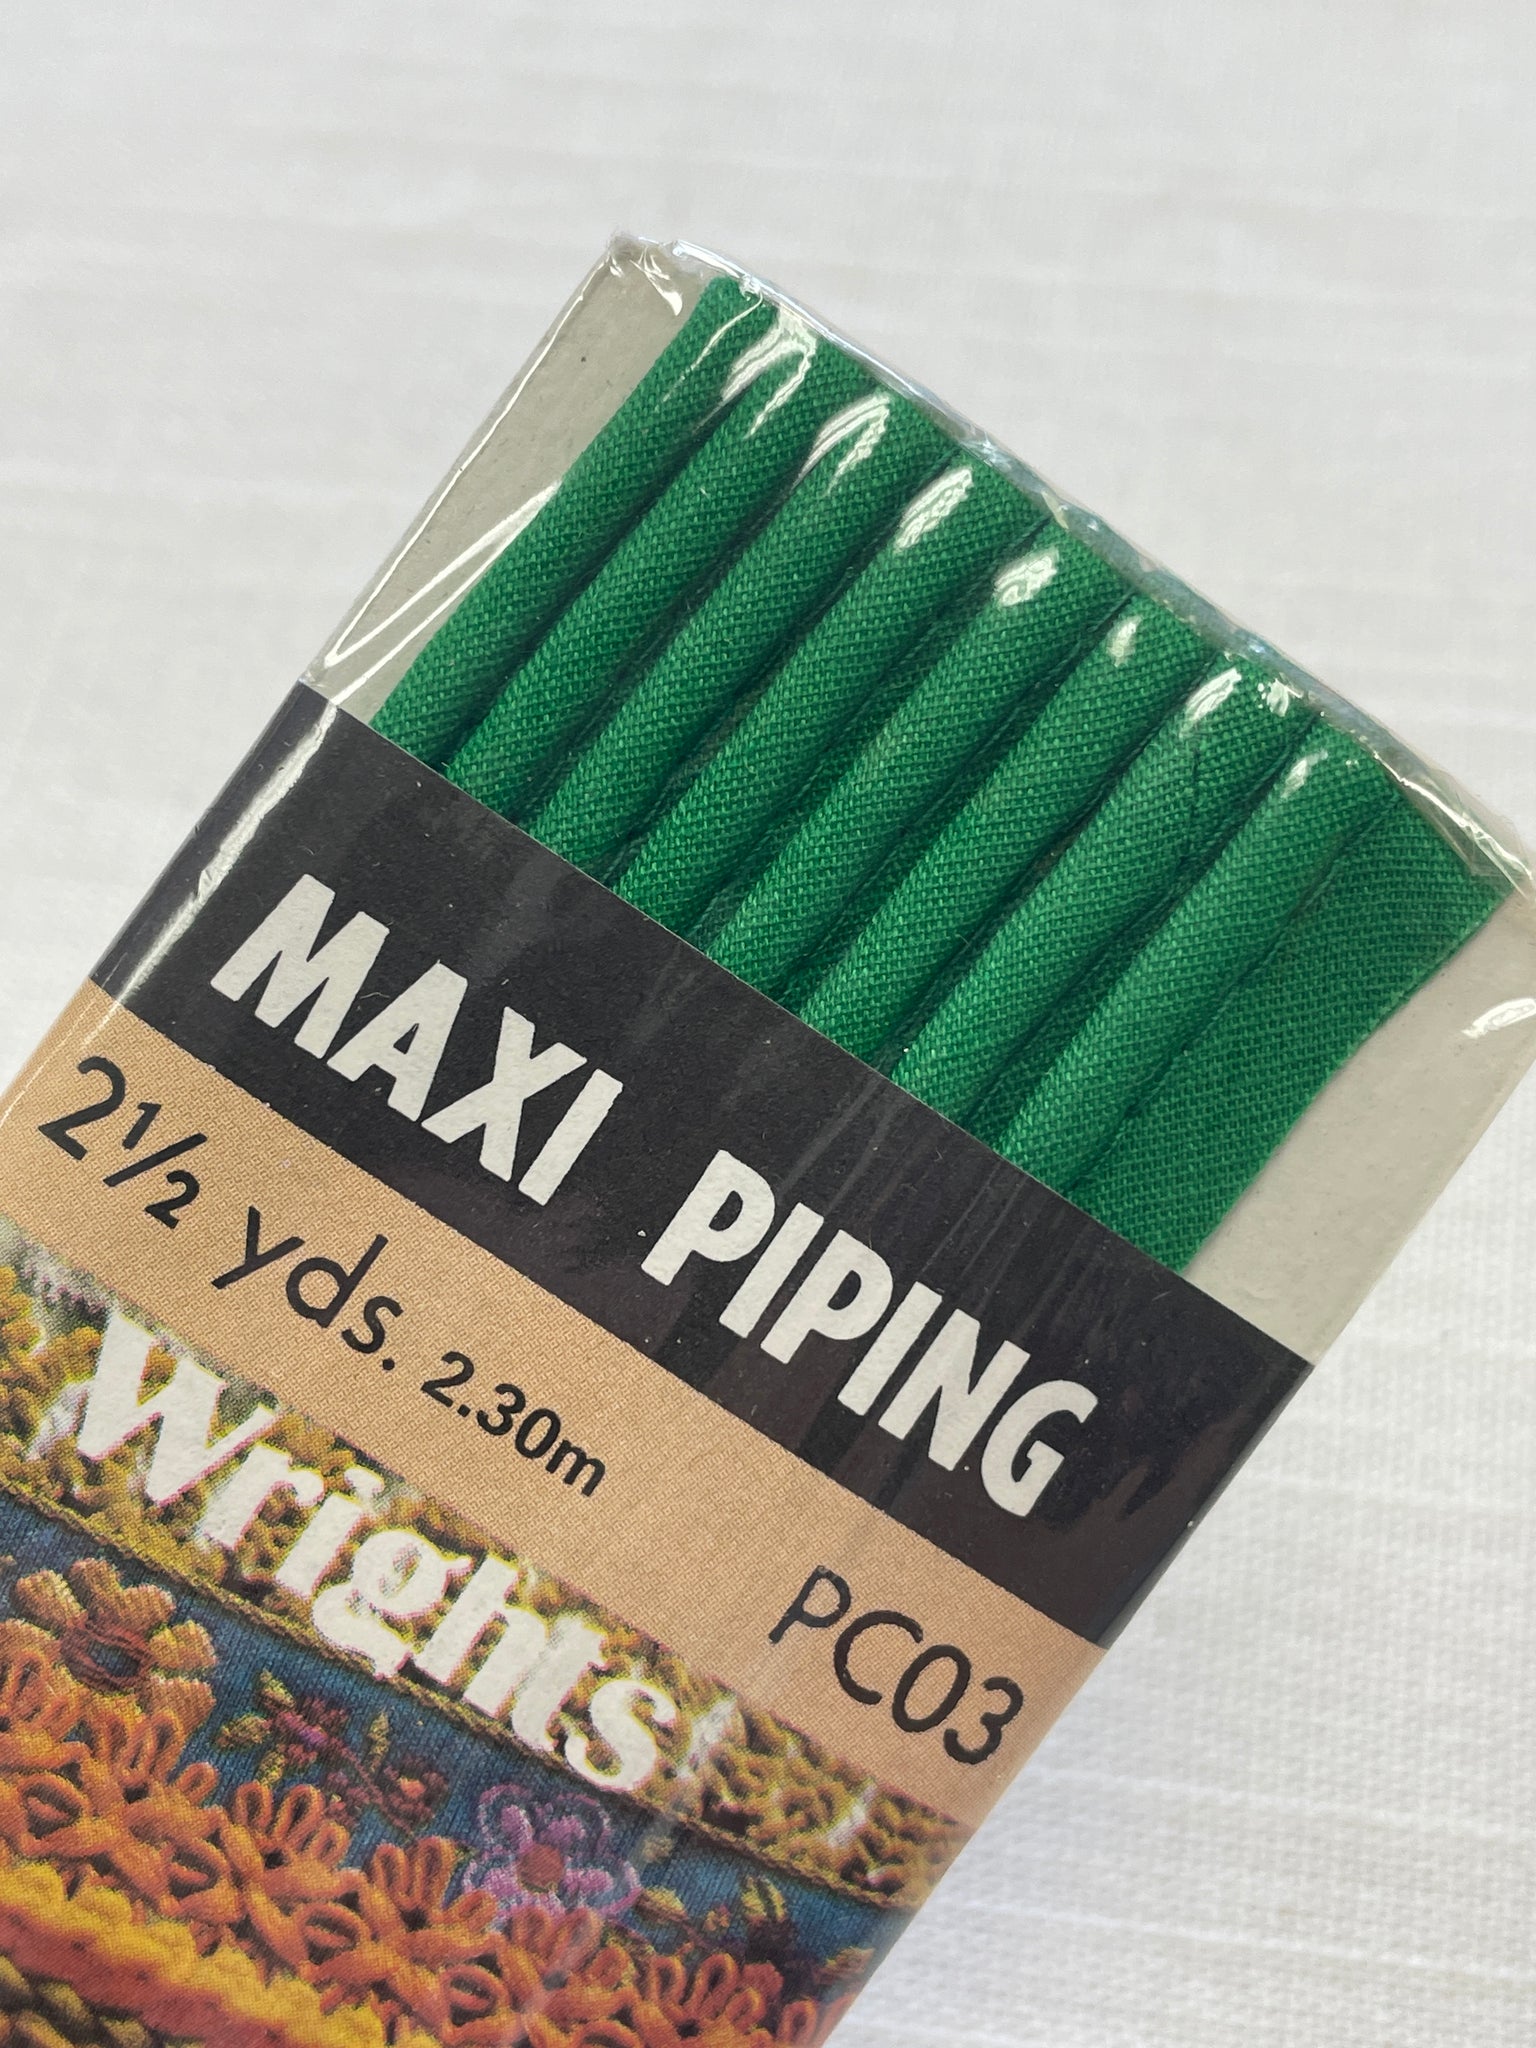 2 1/2 YD Poly/Cotton Piping - Green